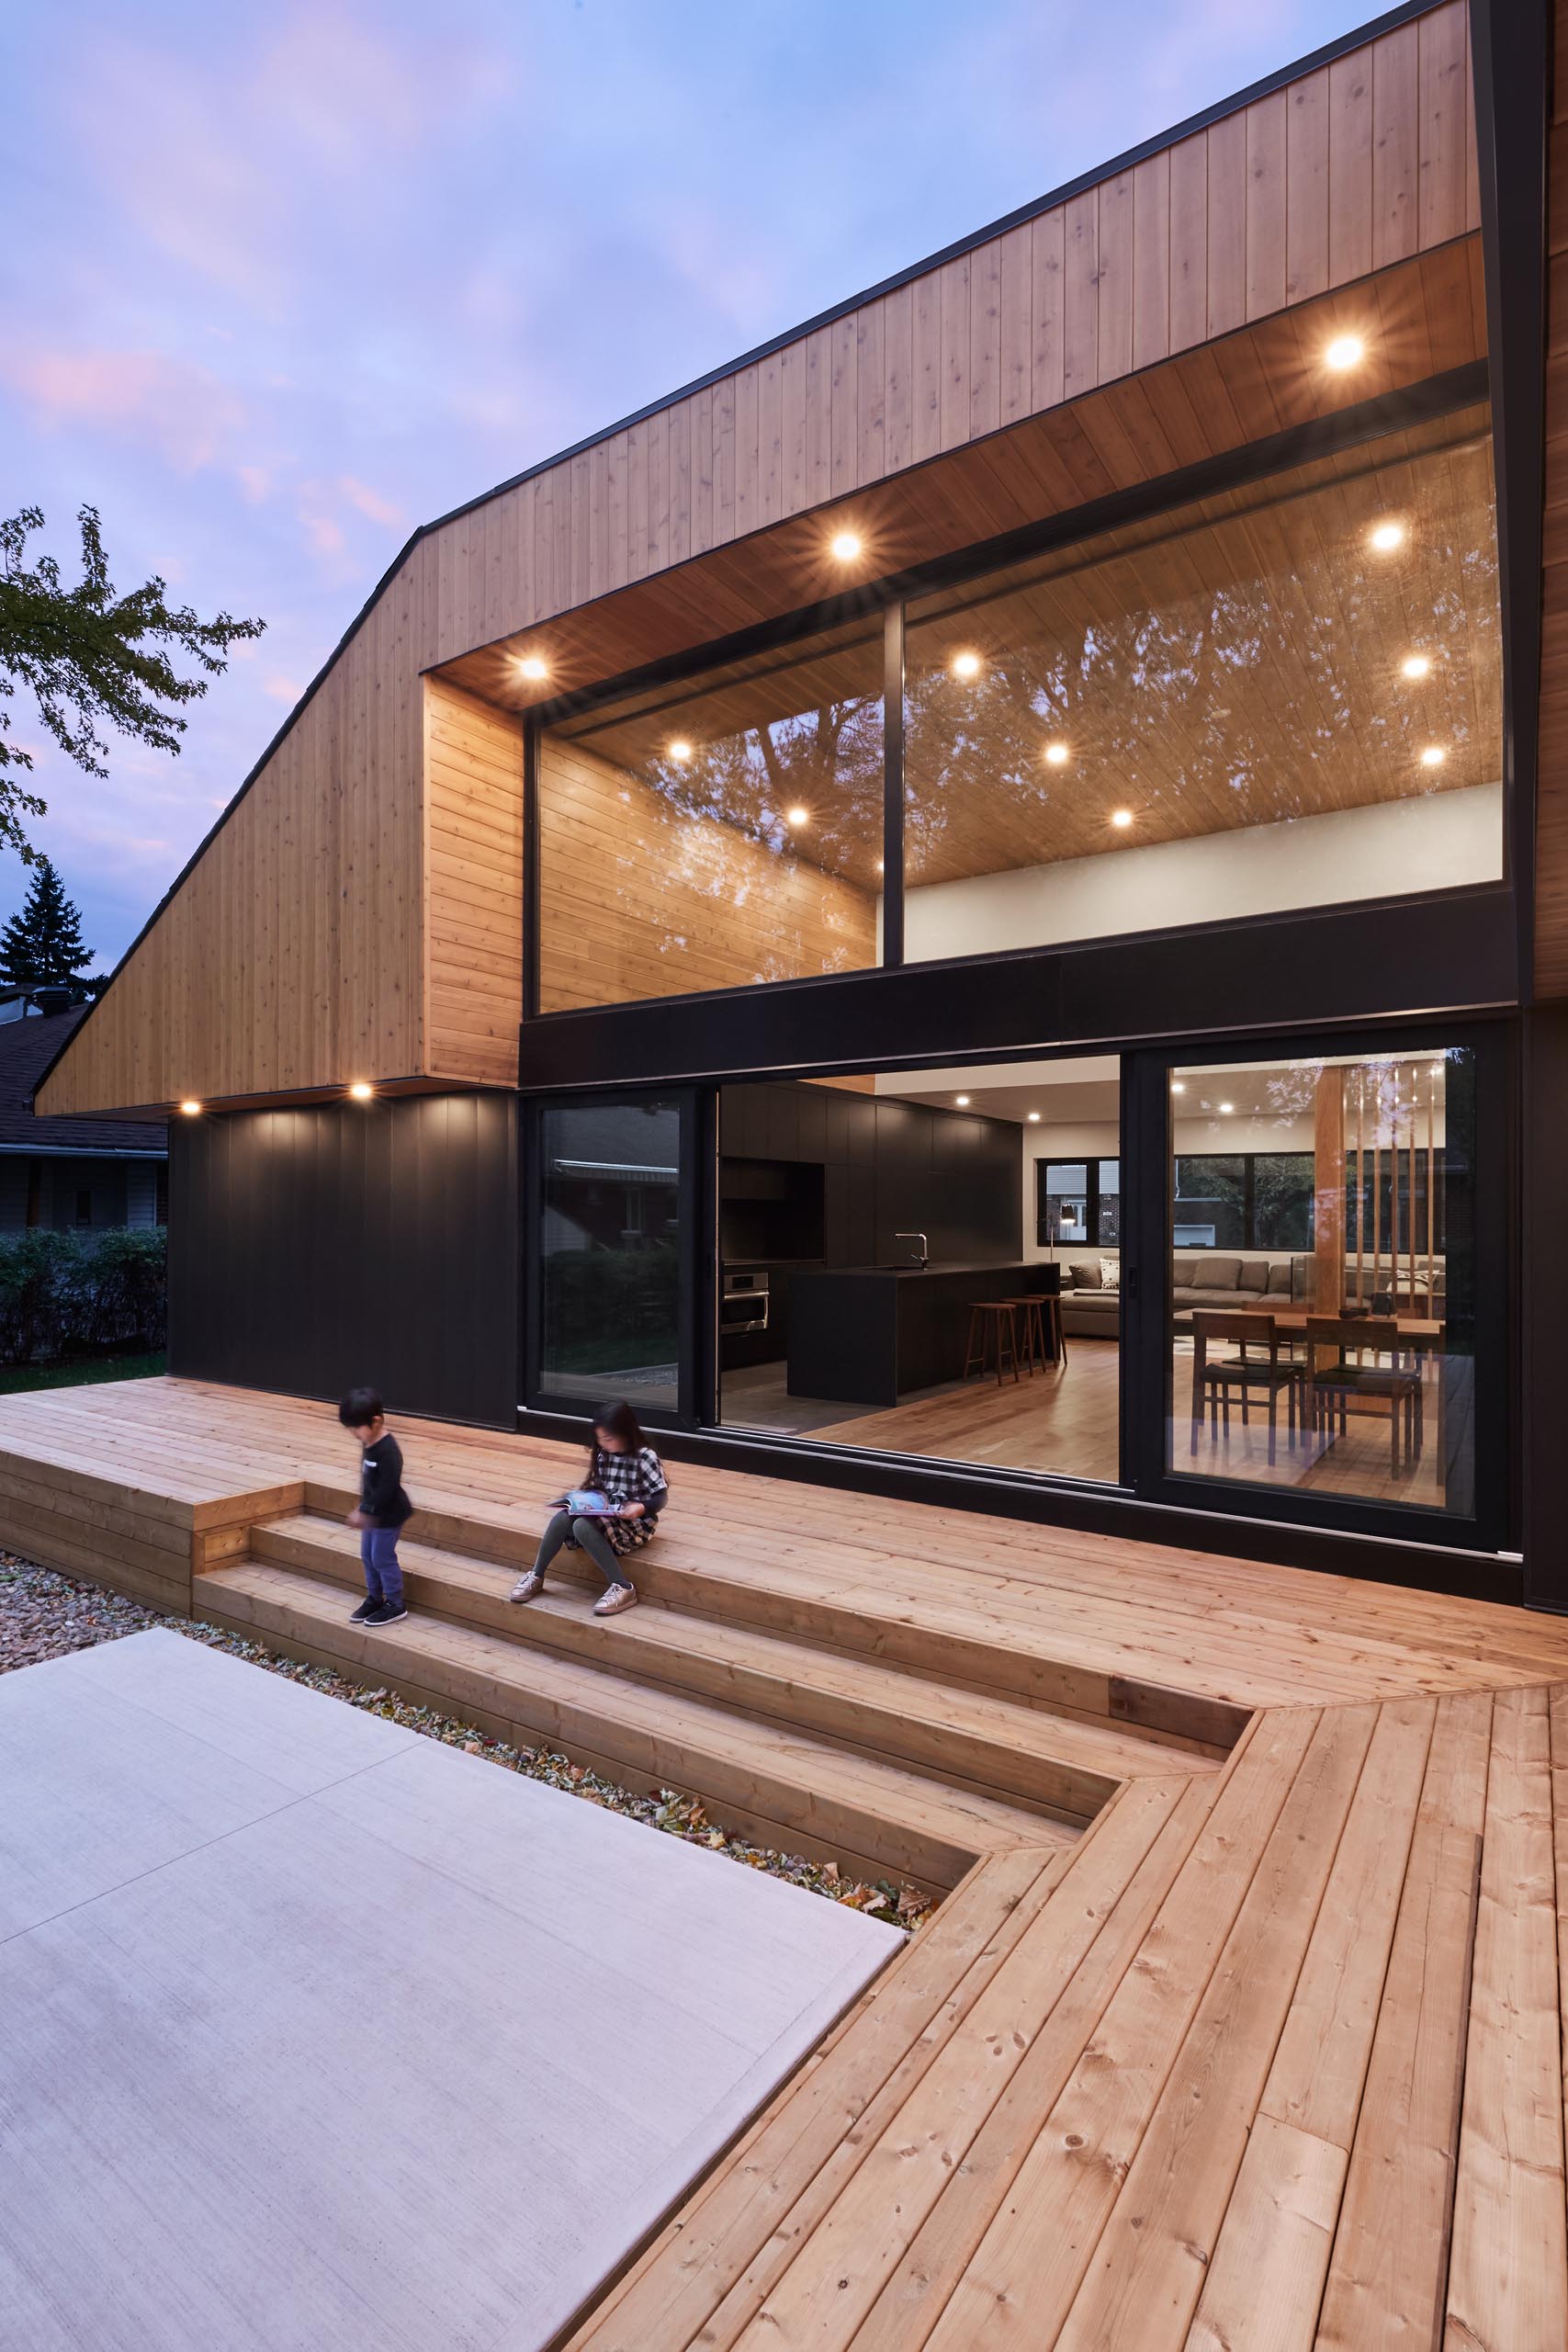 A modern home with high ceilings, and a black framed sliding lass door.